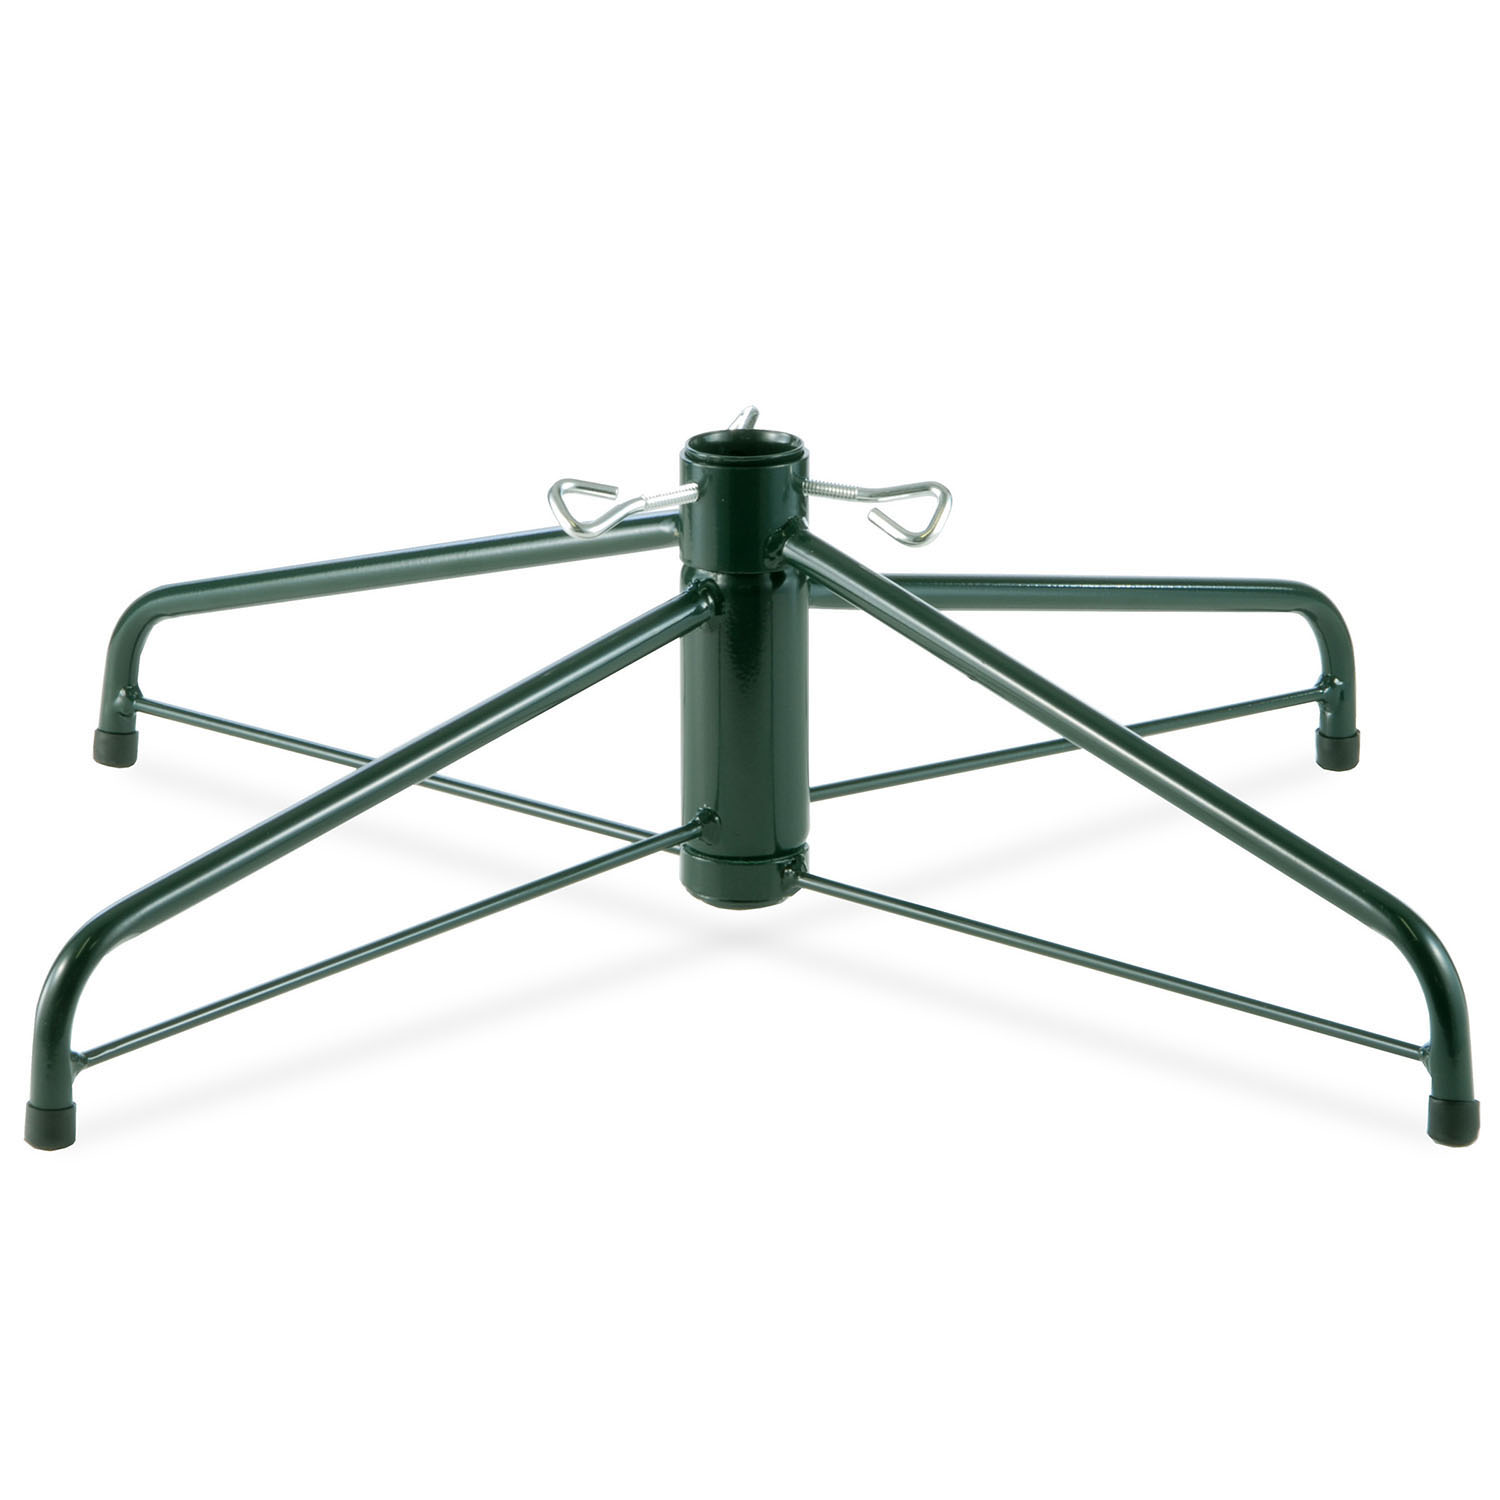 28 Inch Folding Tree Stand For 7.5 Foot To 8 Foot Trees: 1.25 Inch Pole